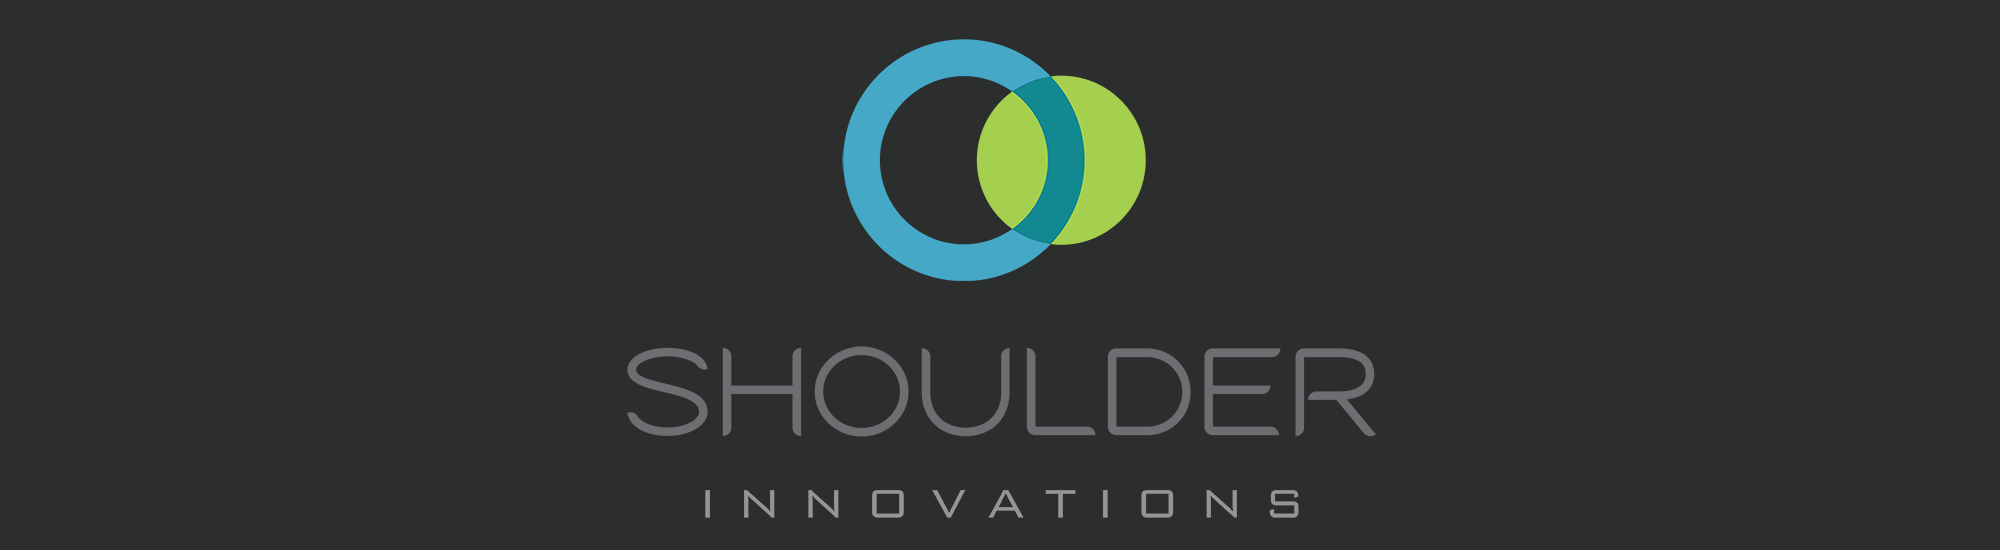 Shoulder Innovations Announces Exclusive License Agreement for Genesis Software Innovations PreView Shoulder™ Software